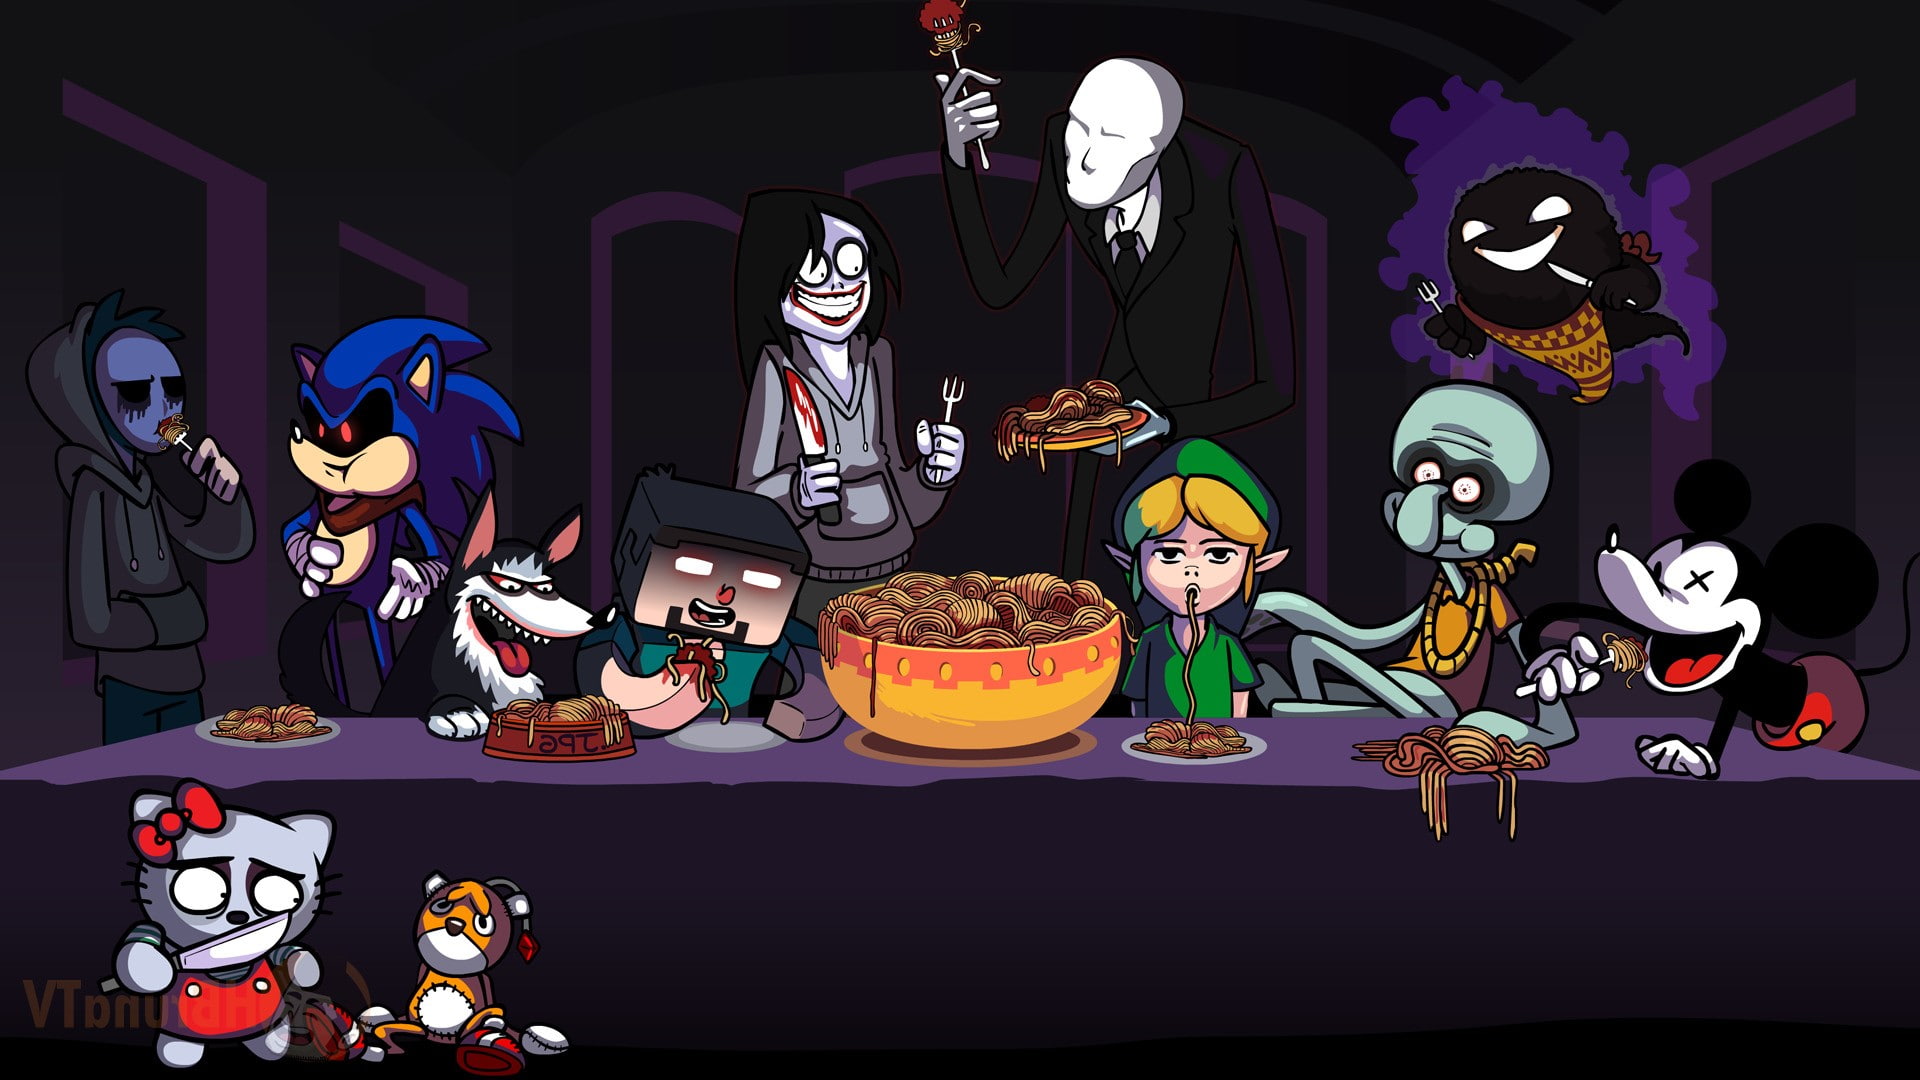 video game characters mickey mouse ghast link sonic the hedgehog spaghetti minecraft parody halloween slender man hello kitty the last supper steve pokemon